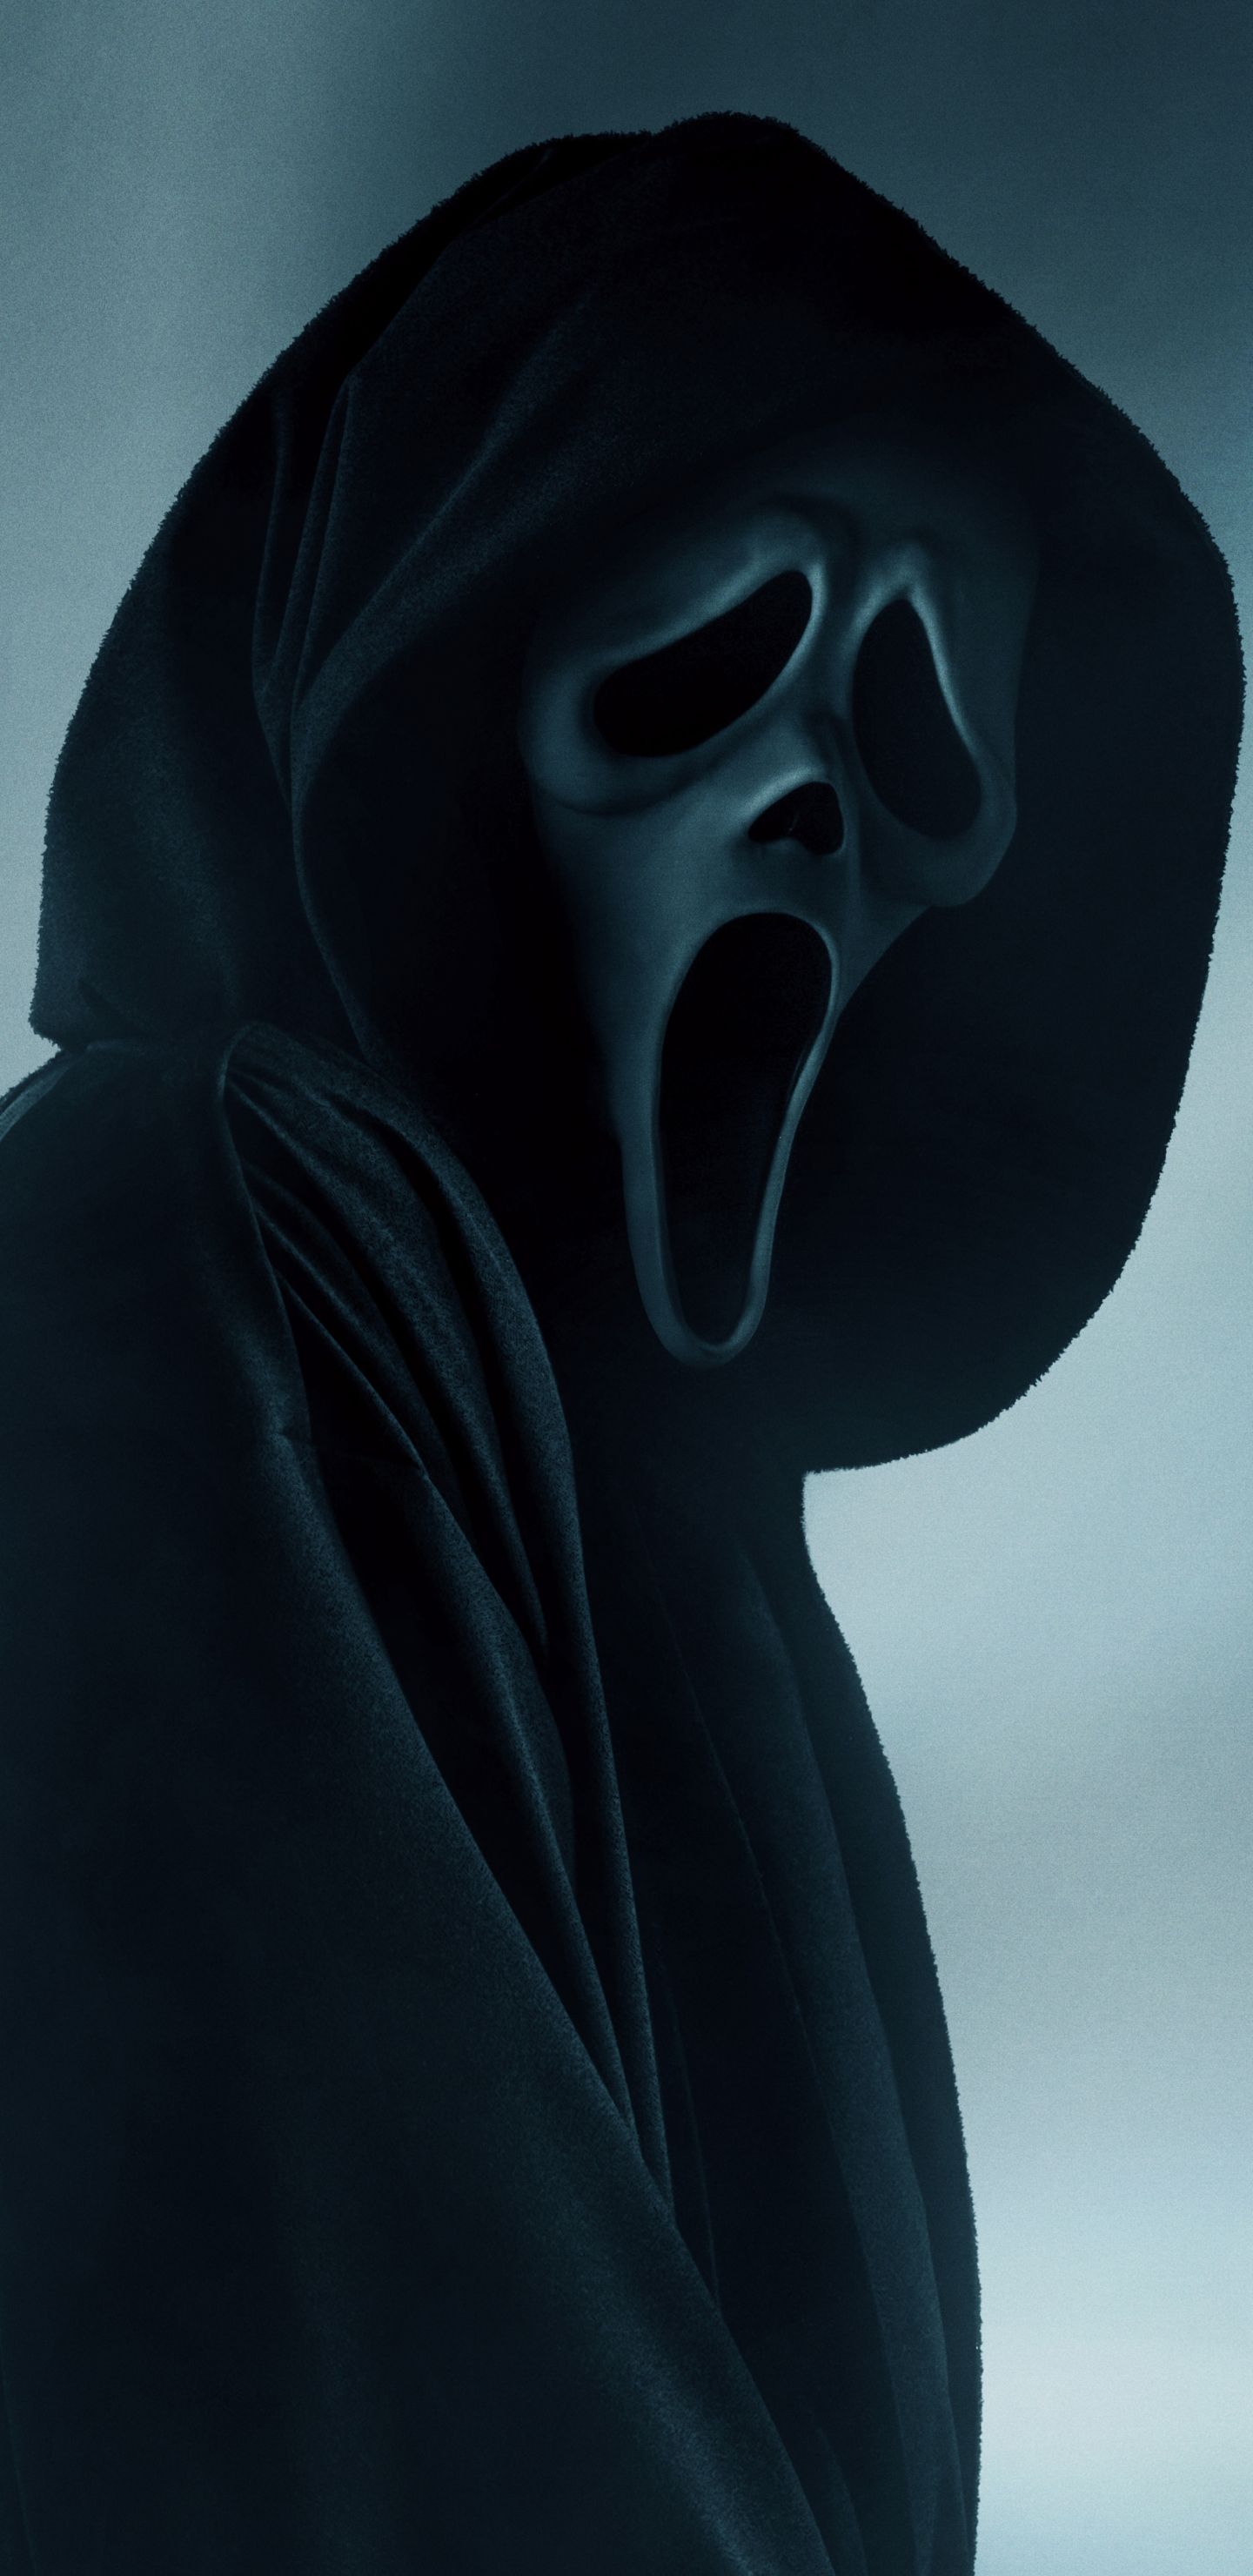 Scream 5 iPhone Wallpaper with high-resolution 1080x1920 pixel. You can use this wallpaper for your iPhone 5, 6, 7, 8, X, XS, XR backgrounds, Mobile Screensaver, or iPad Lock Screen - Ghostface